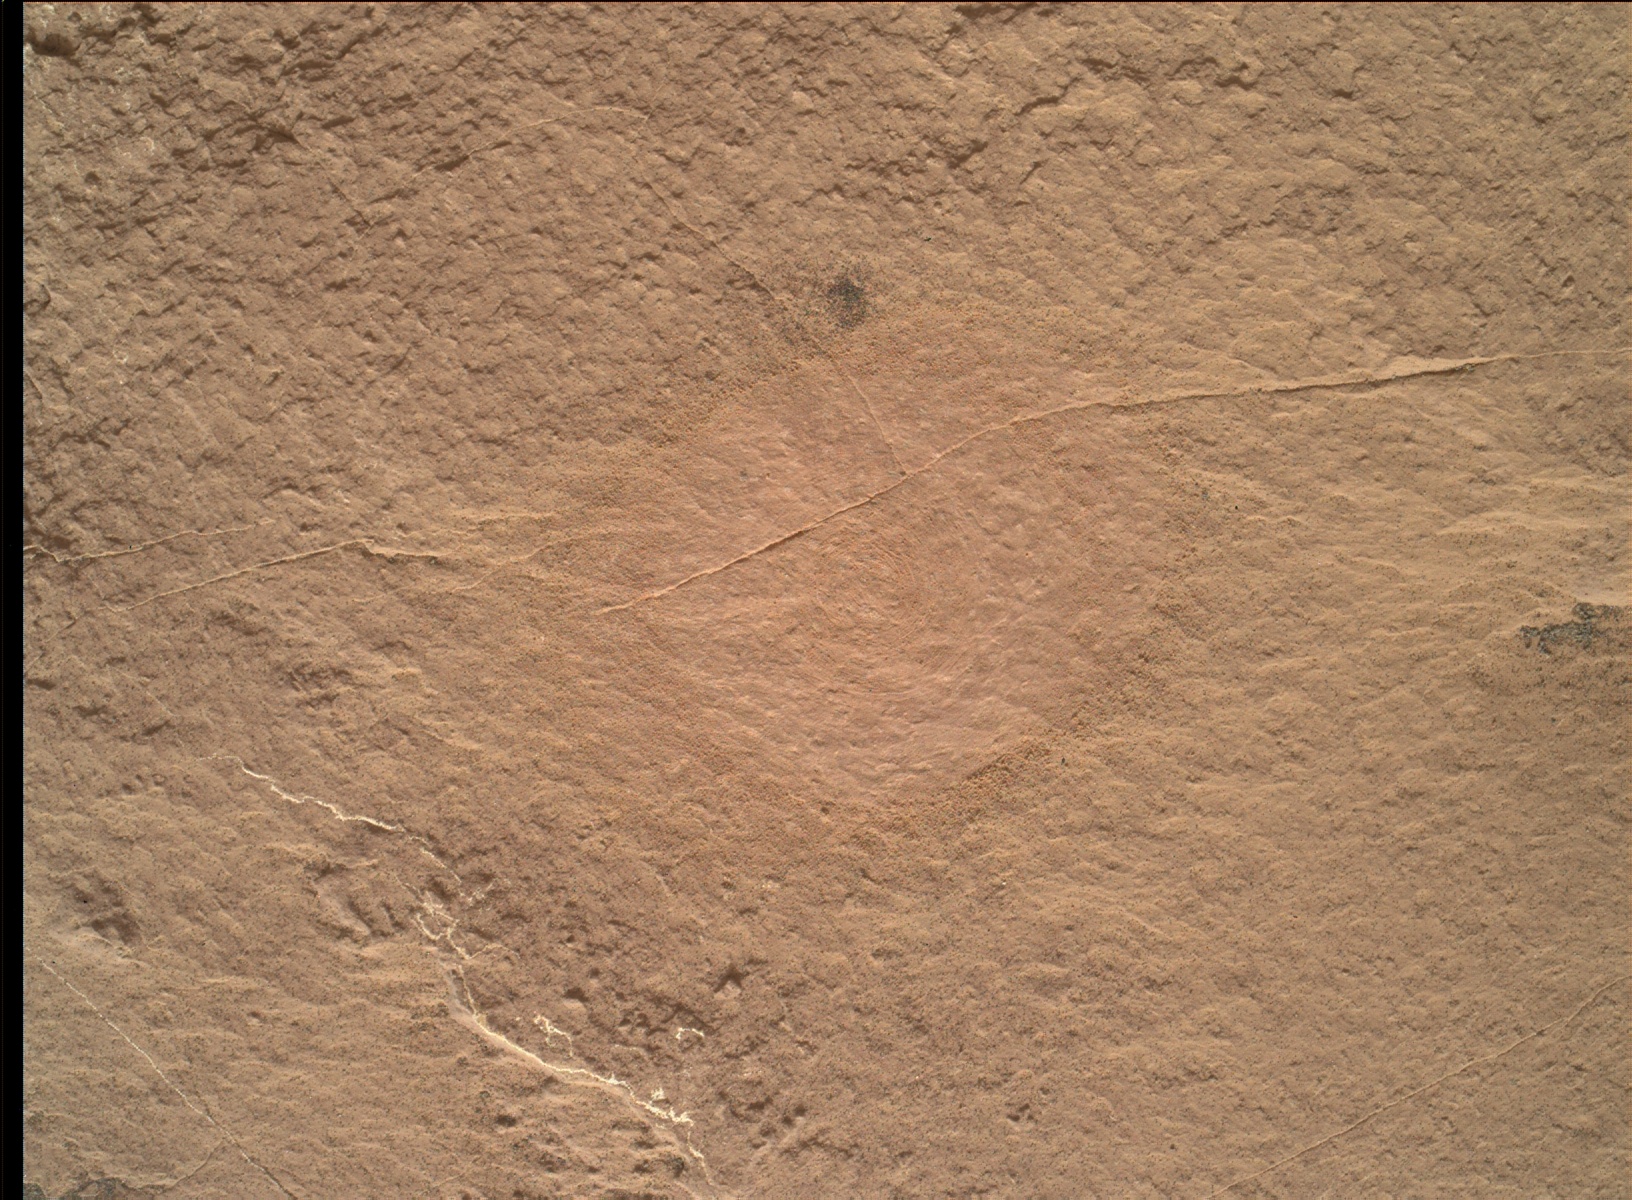 Nasa's Mars rover Curiosity acquired this image using its Mars Hand Lens Imager (MAHLI) on Sol 1511